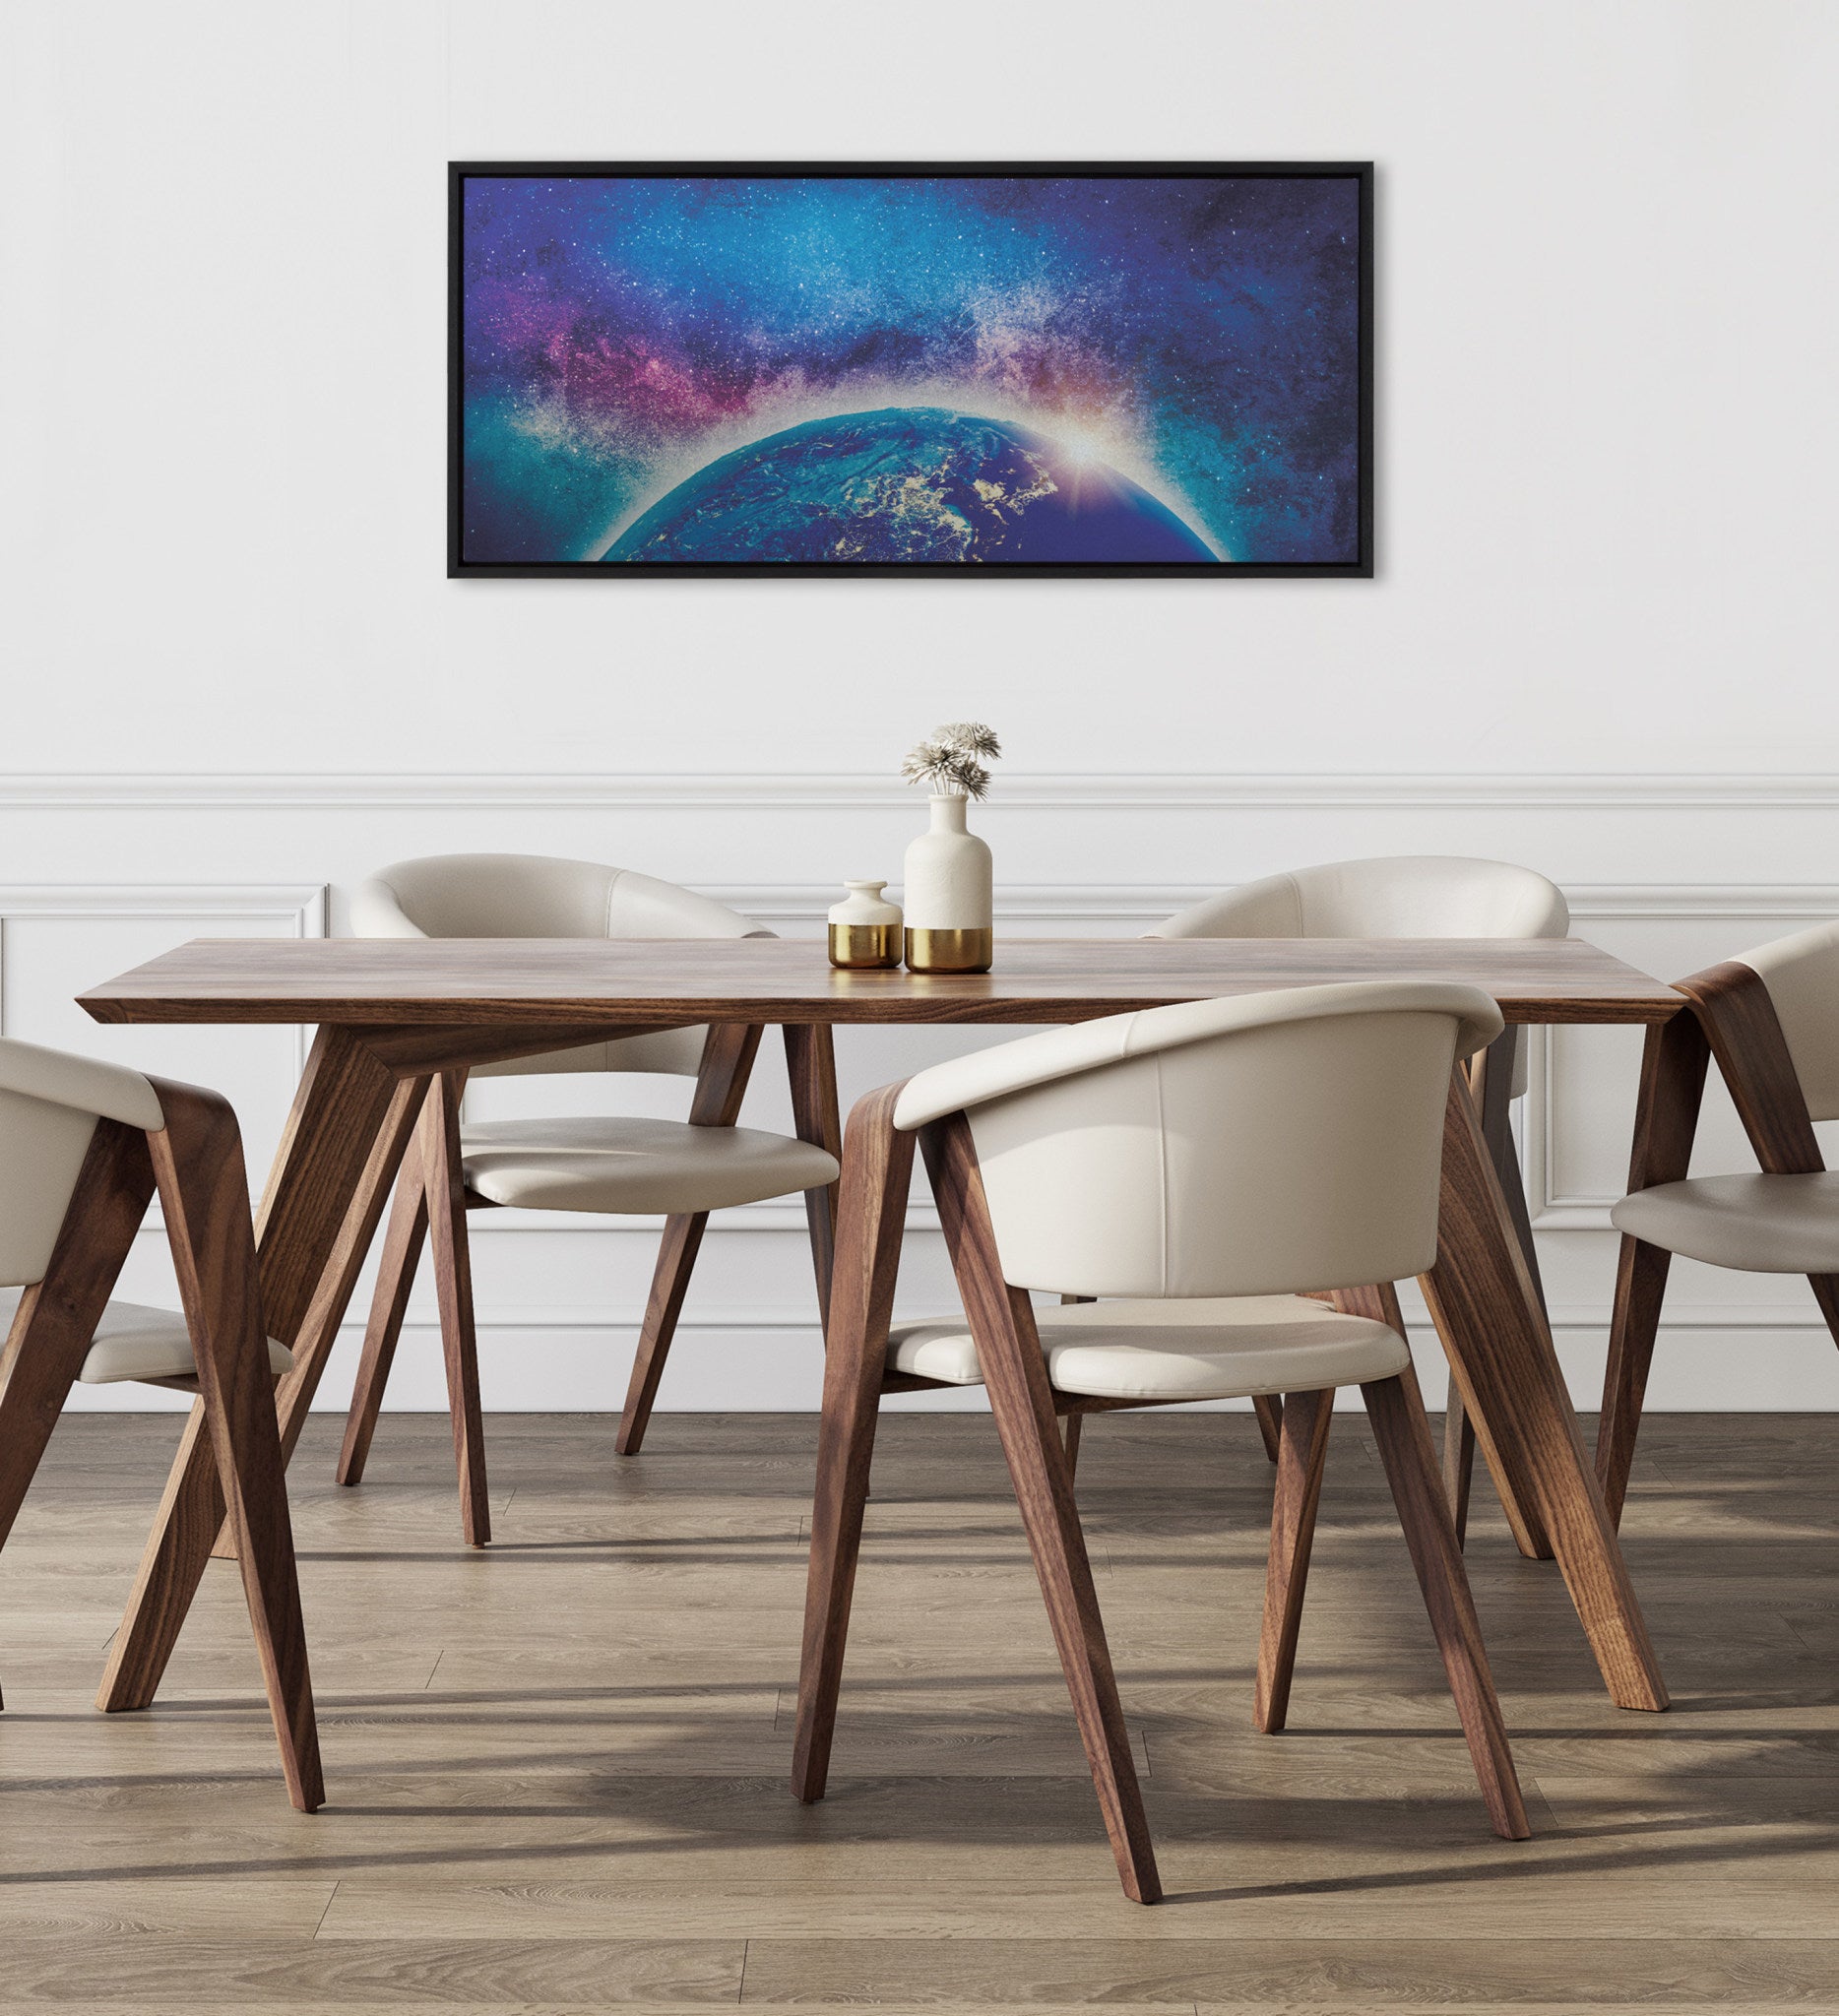 Sylvie Milky Way Galaxy Landscape Earth View from Space Framed Canvas by 1xpert